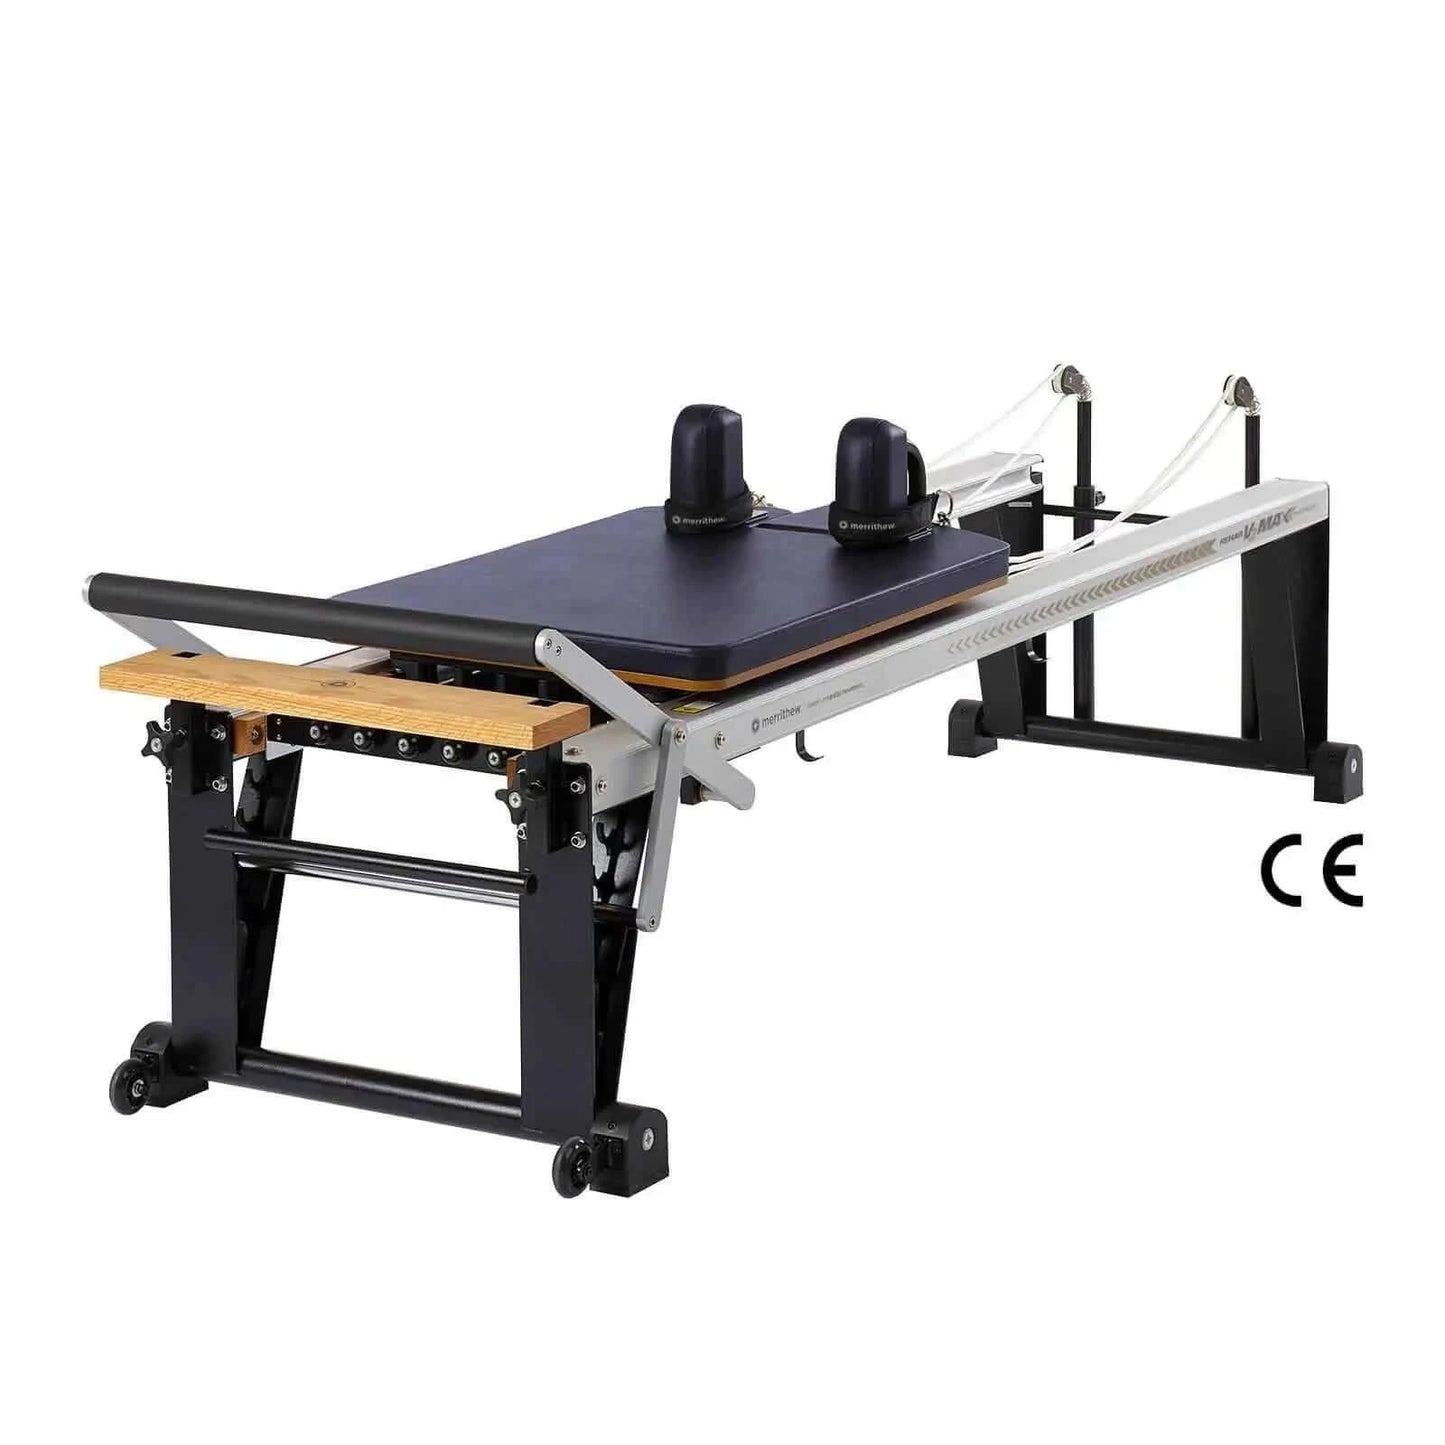 Eclipse Merrithew™ Pilates Reformer Extension Upgrade · Rehab V2 Max™ by Merrithew™ sold by Pilates Matters® by BSP LLC